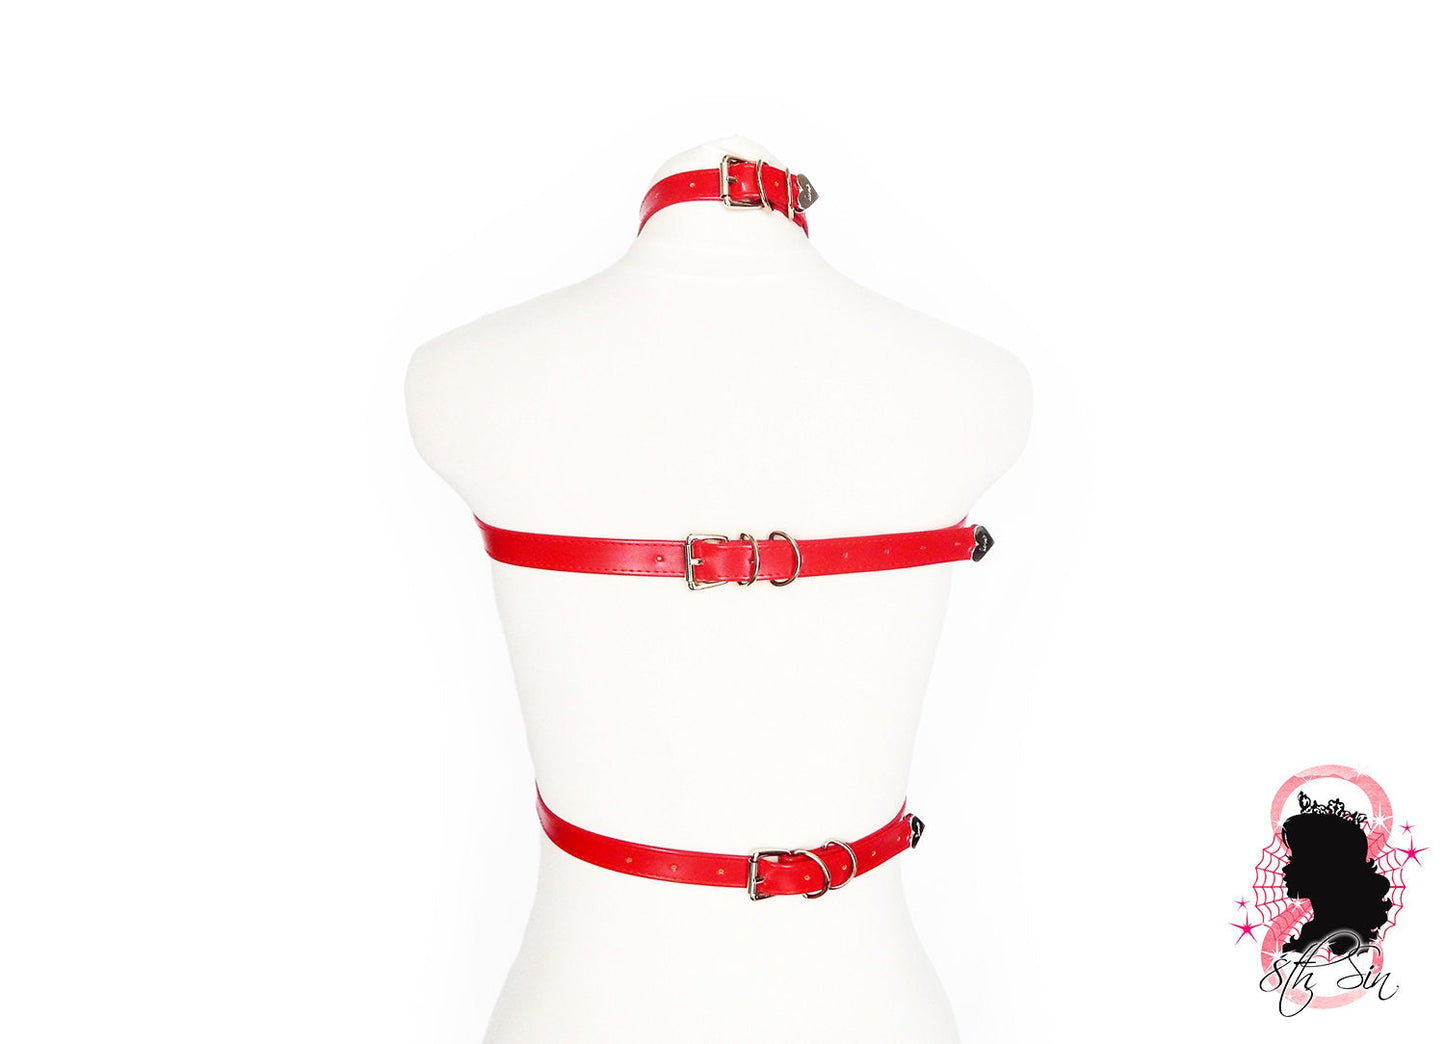 Red Vegan Leather O Ring Harness - SALE